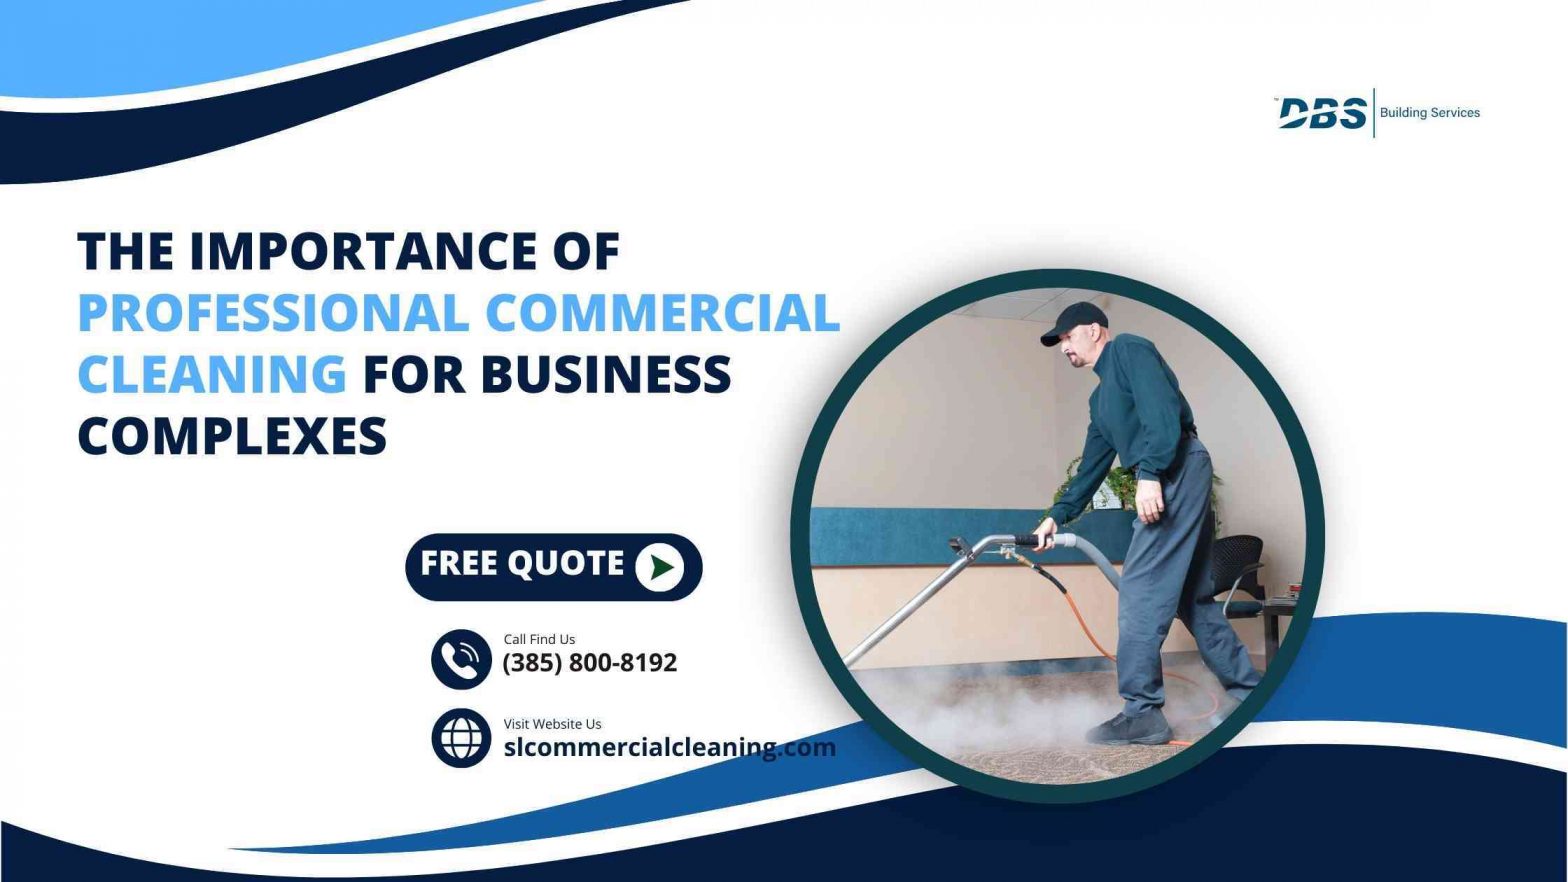 The Importance of Professional Commercial Cleaning for Business Complexes